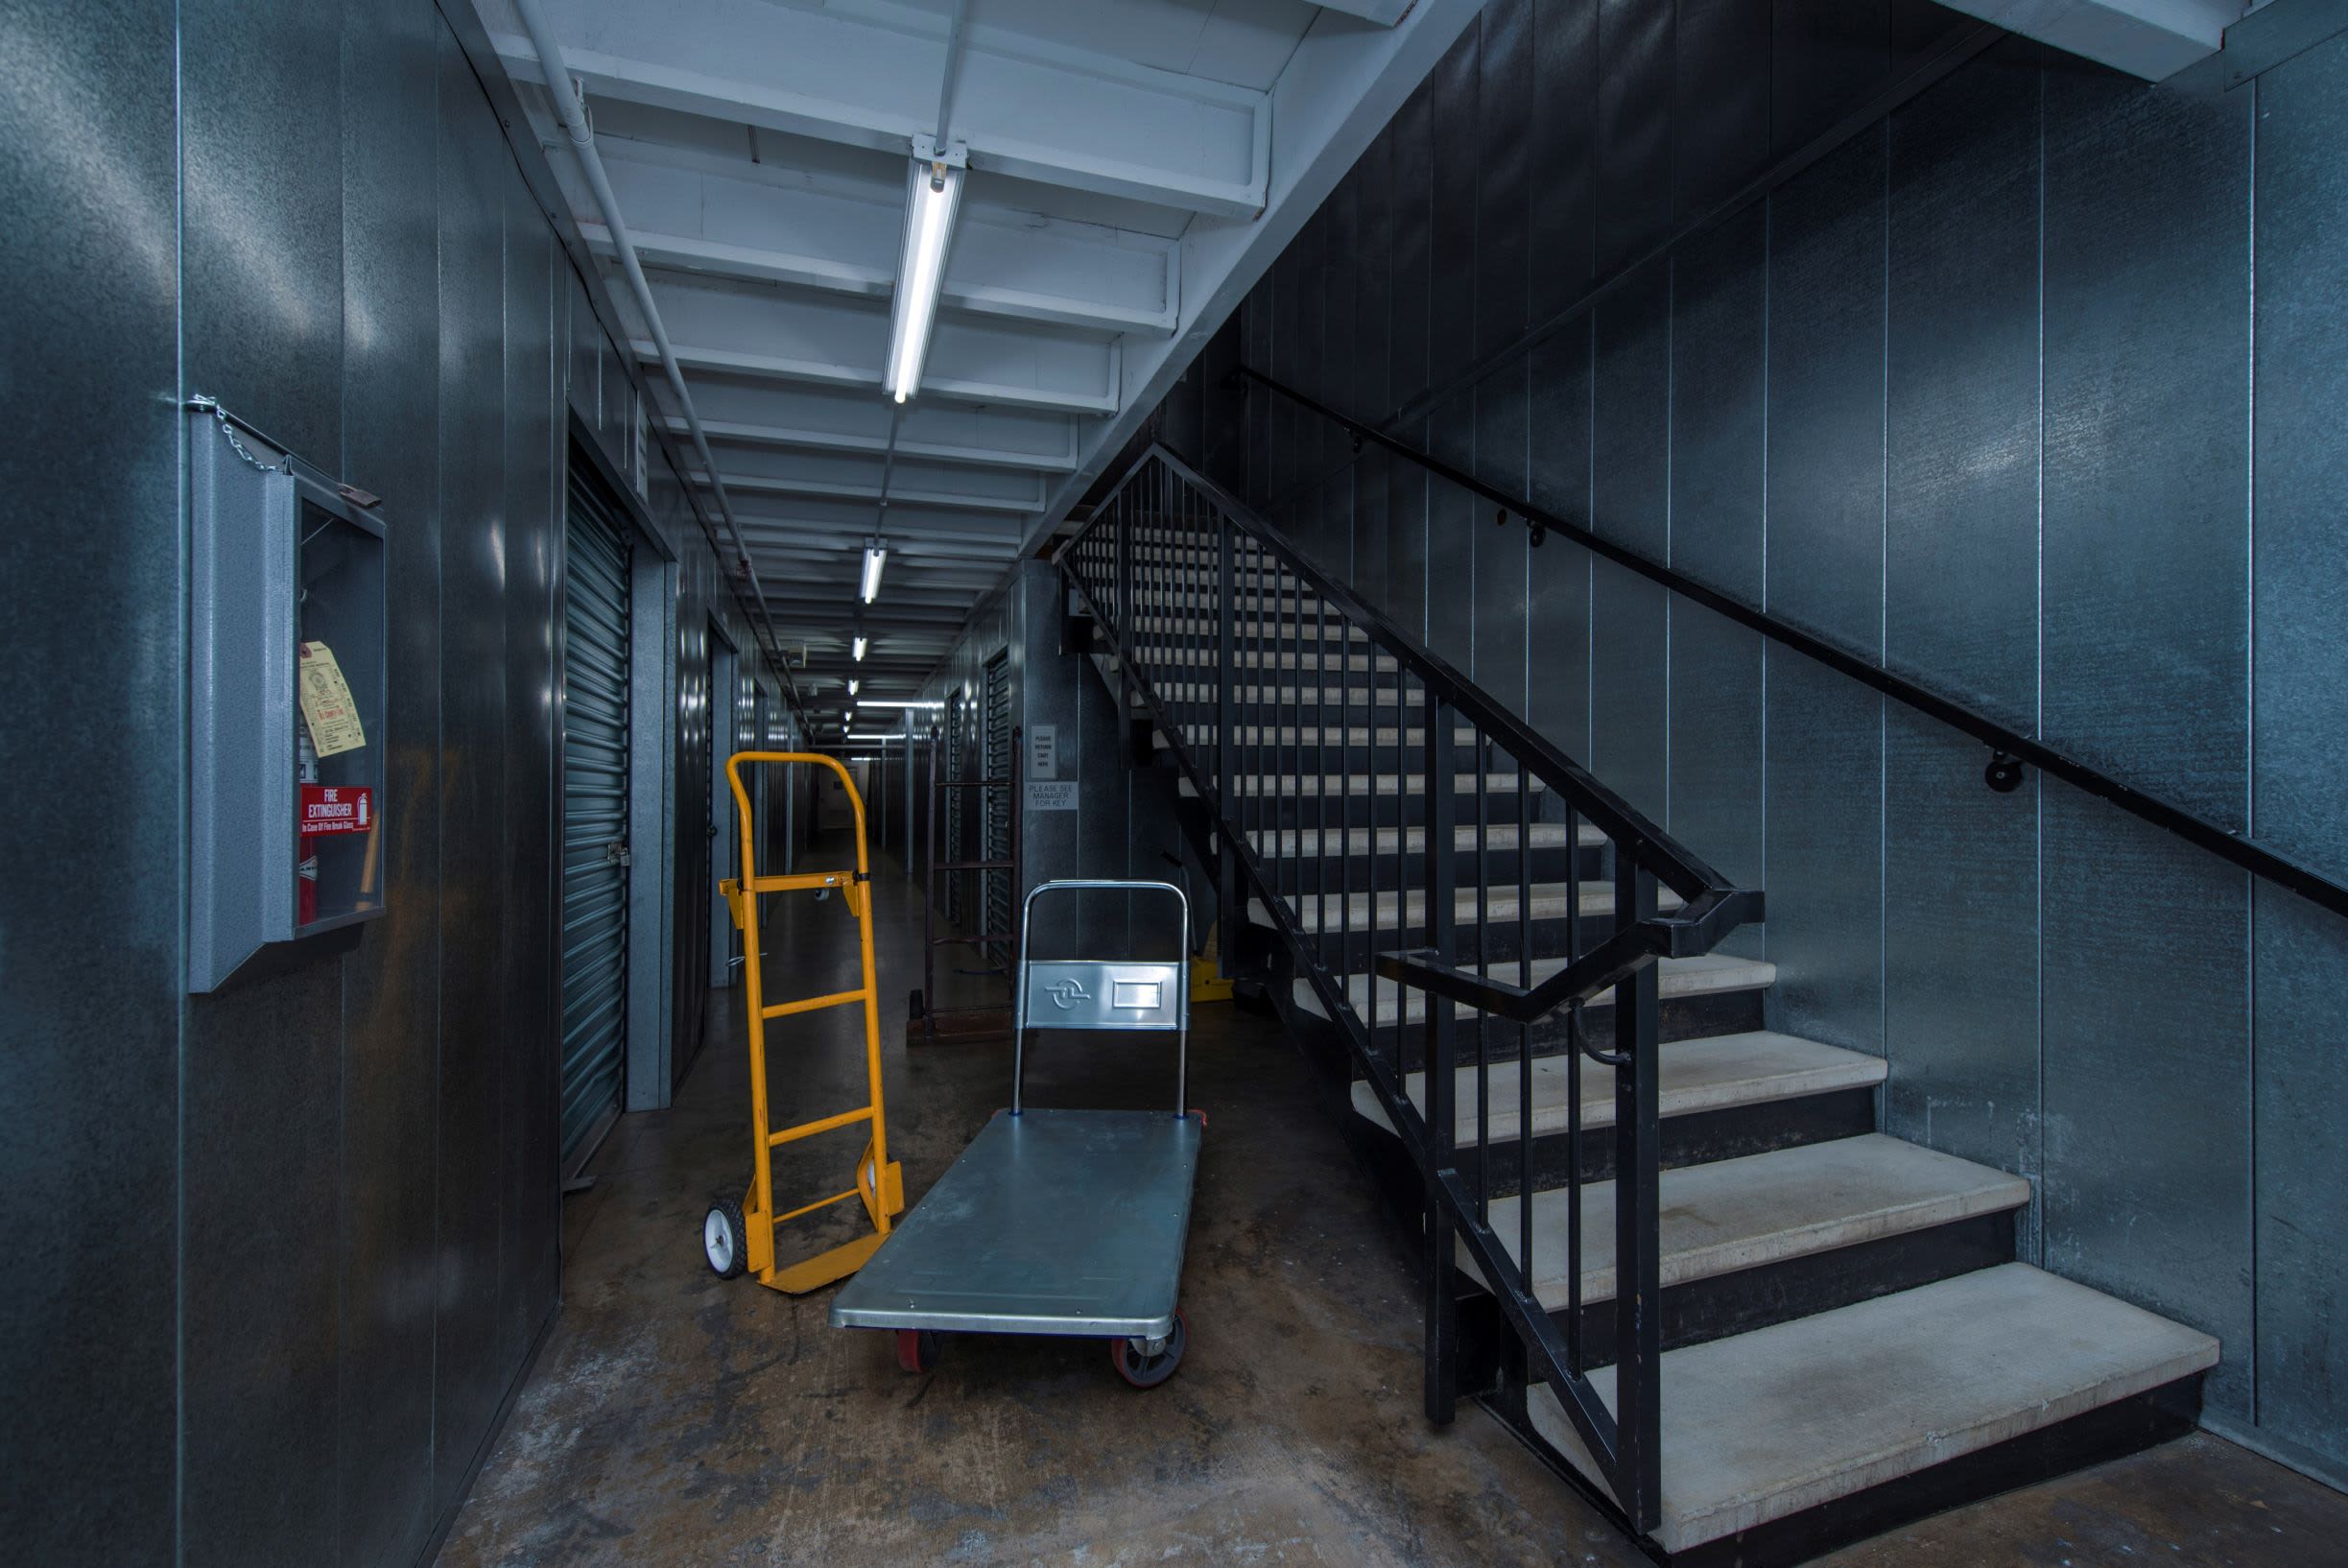 A stairwell and trolley at Poway Road Mini Storage in Poway, CA